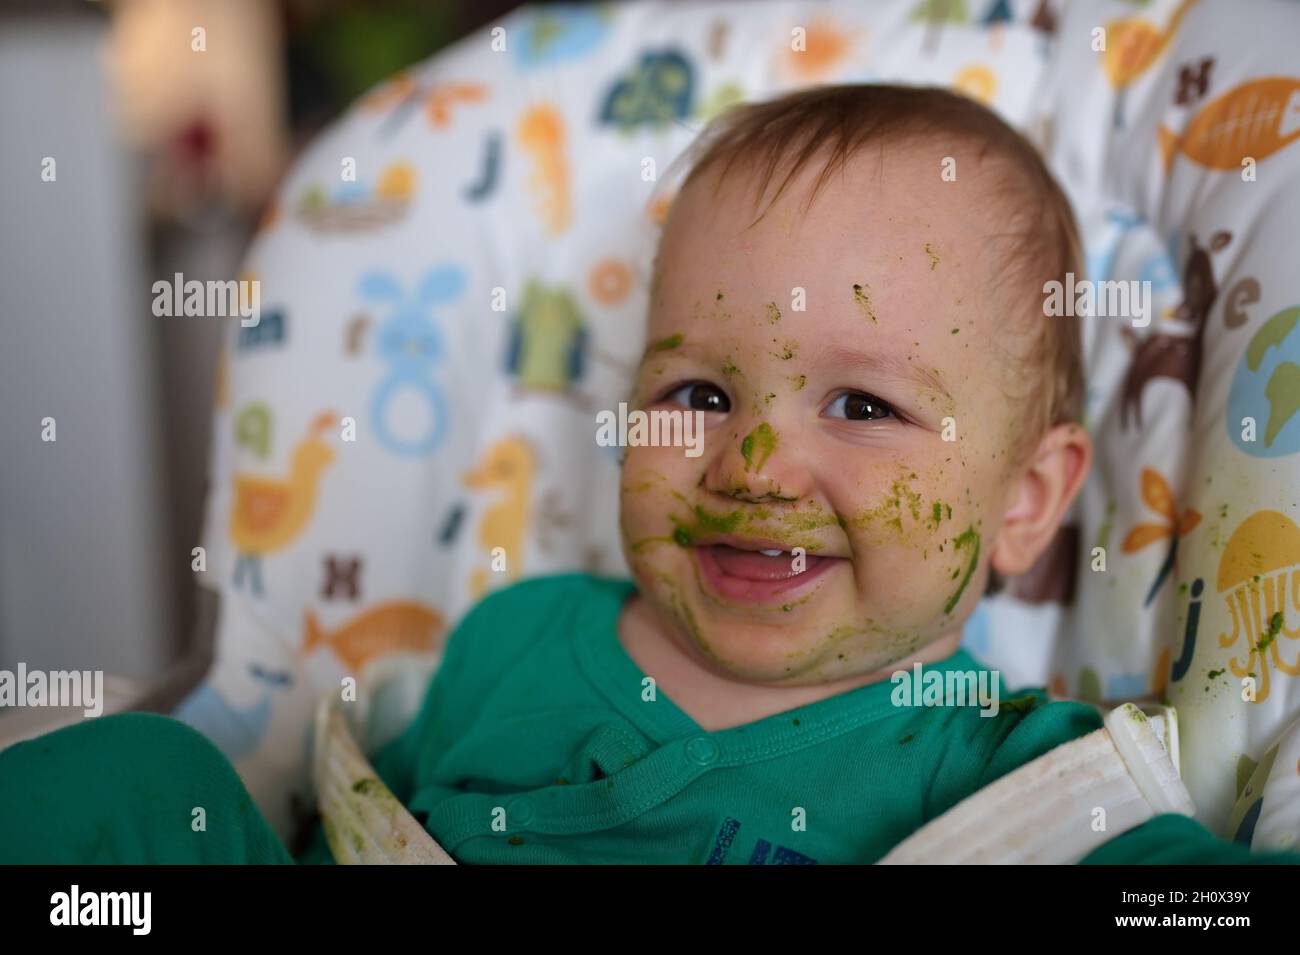 A cute little child's face stained with food Stock Photo